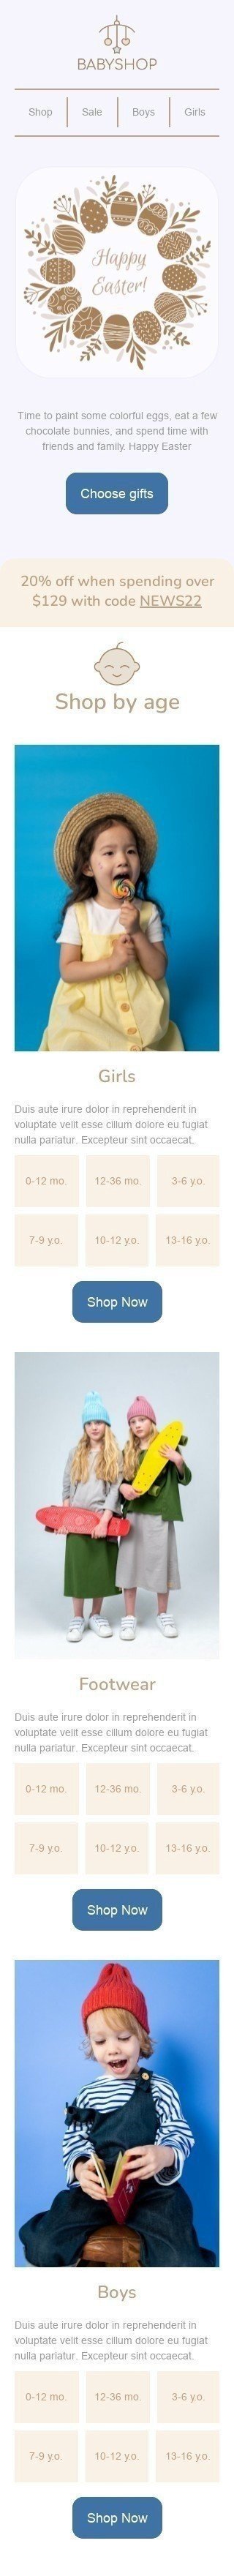 Easter Email Template "Time to paint colorful eggs" for Kids Goods industry mobile view